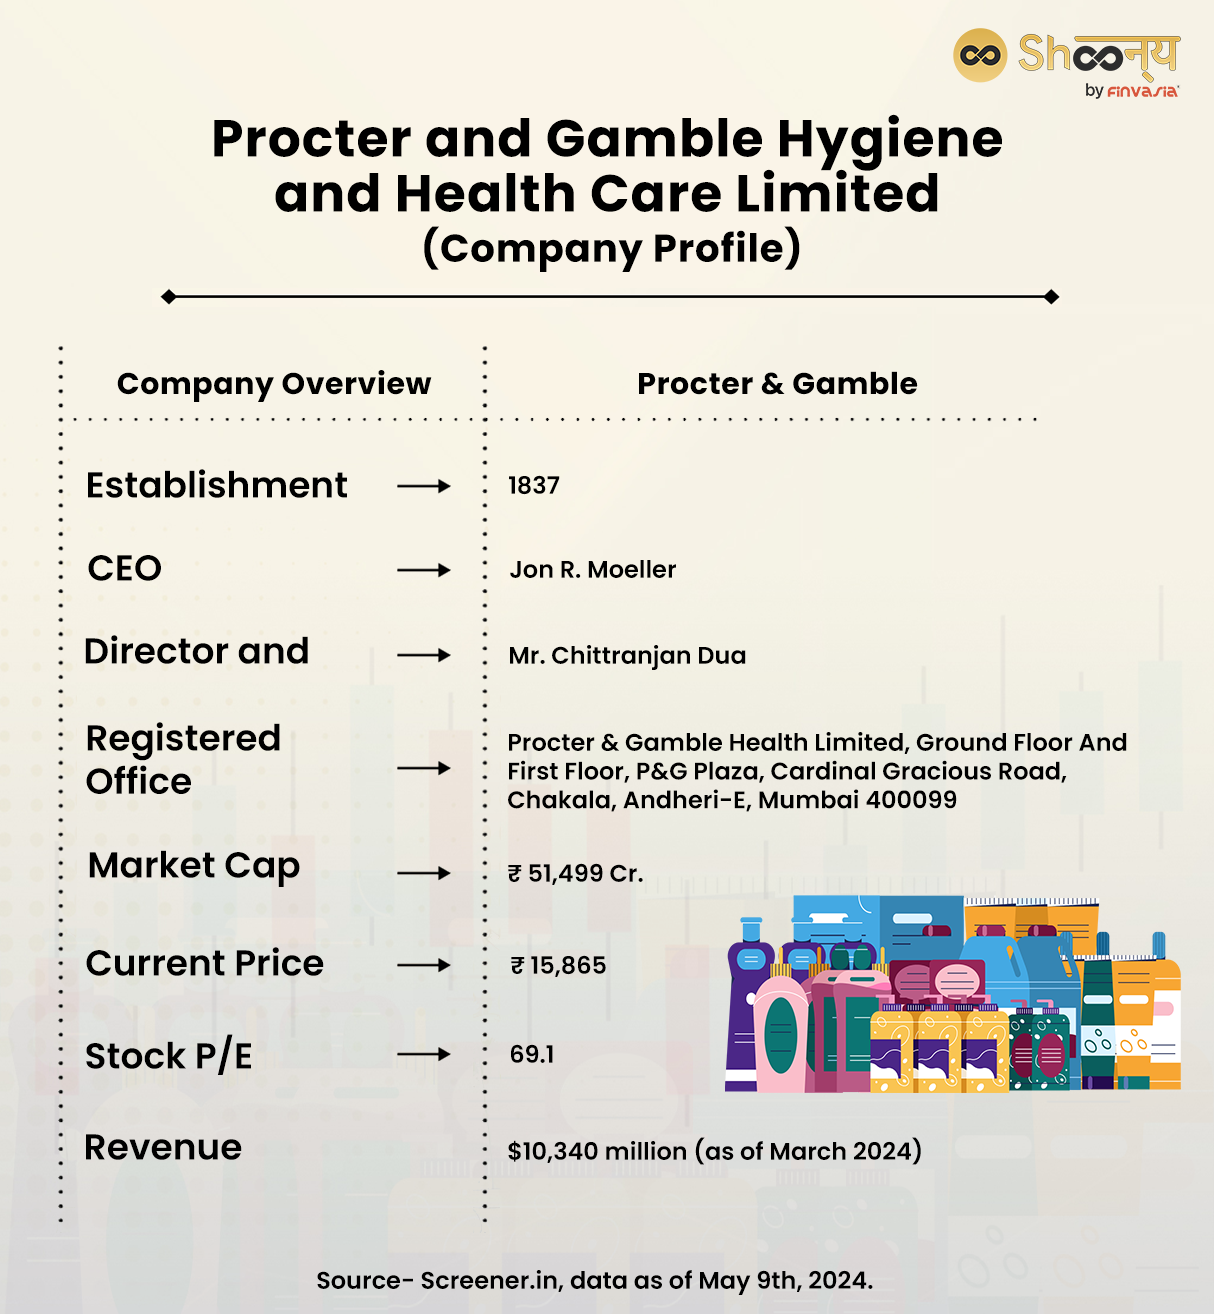 Procter and Gamble Hygiene and Health Care Limited (PGHH) | Company Profile